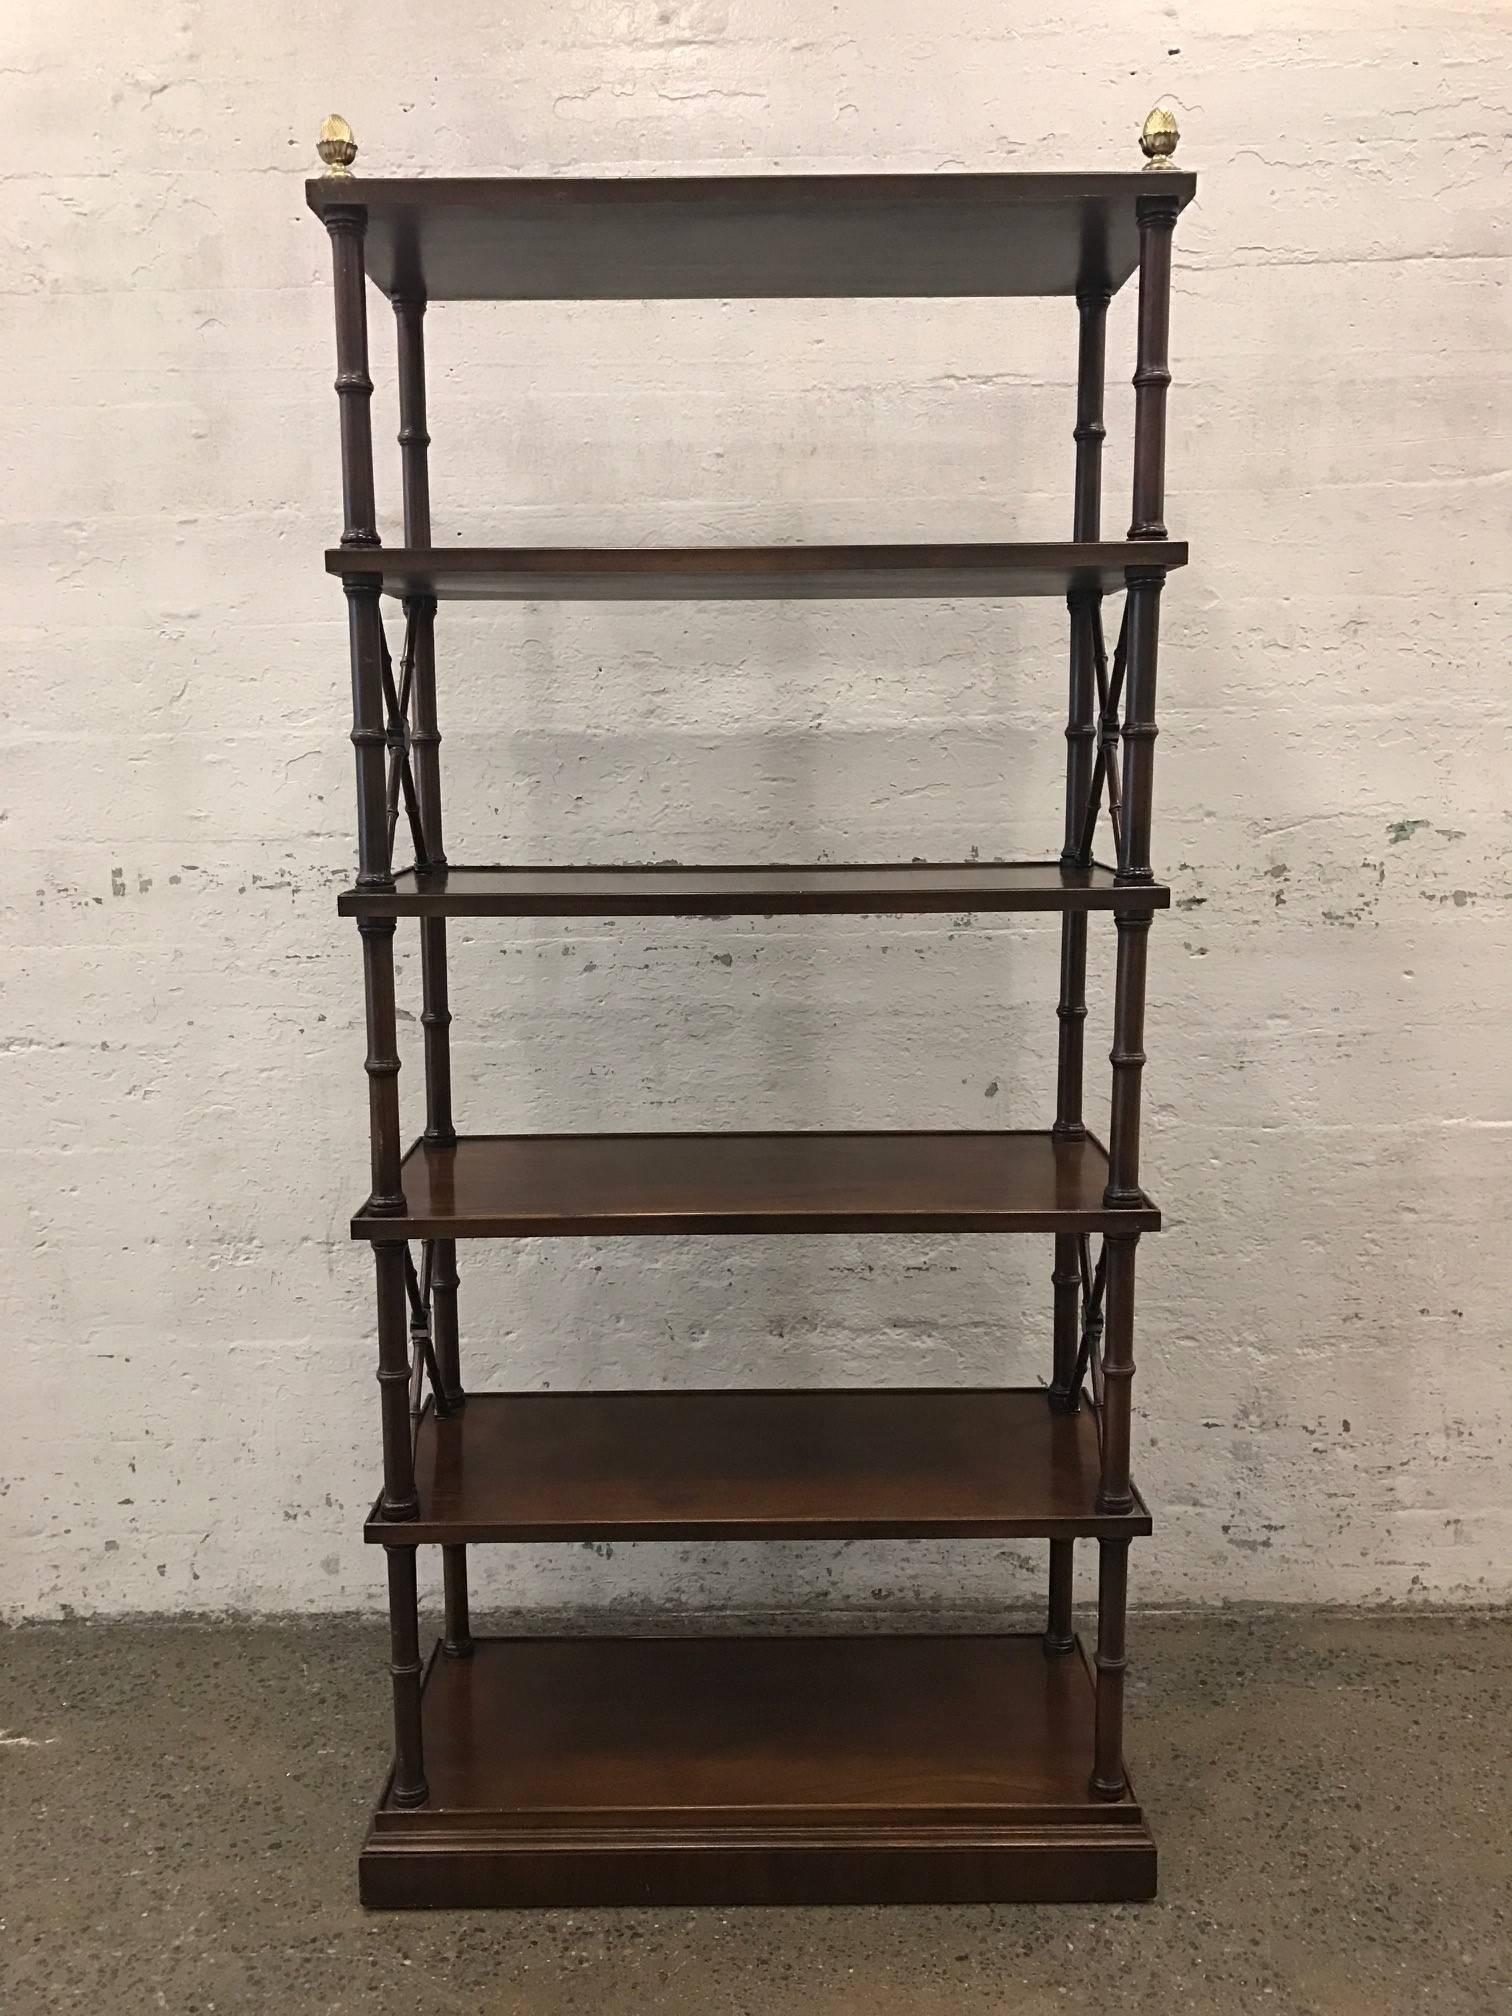 Pair of Directoire style mahogany étagères or bookcases. Has brass pineapple finials at the top.